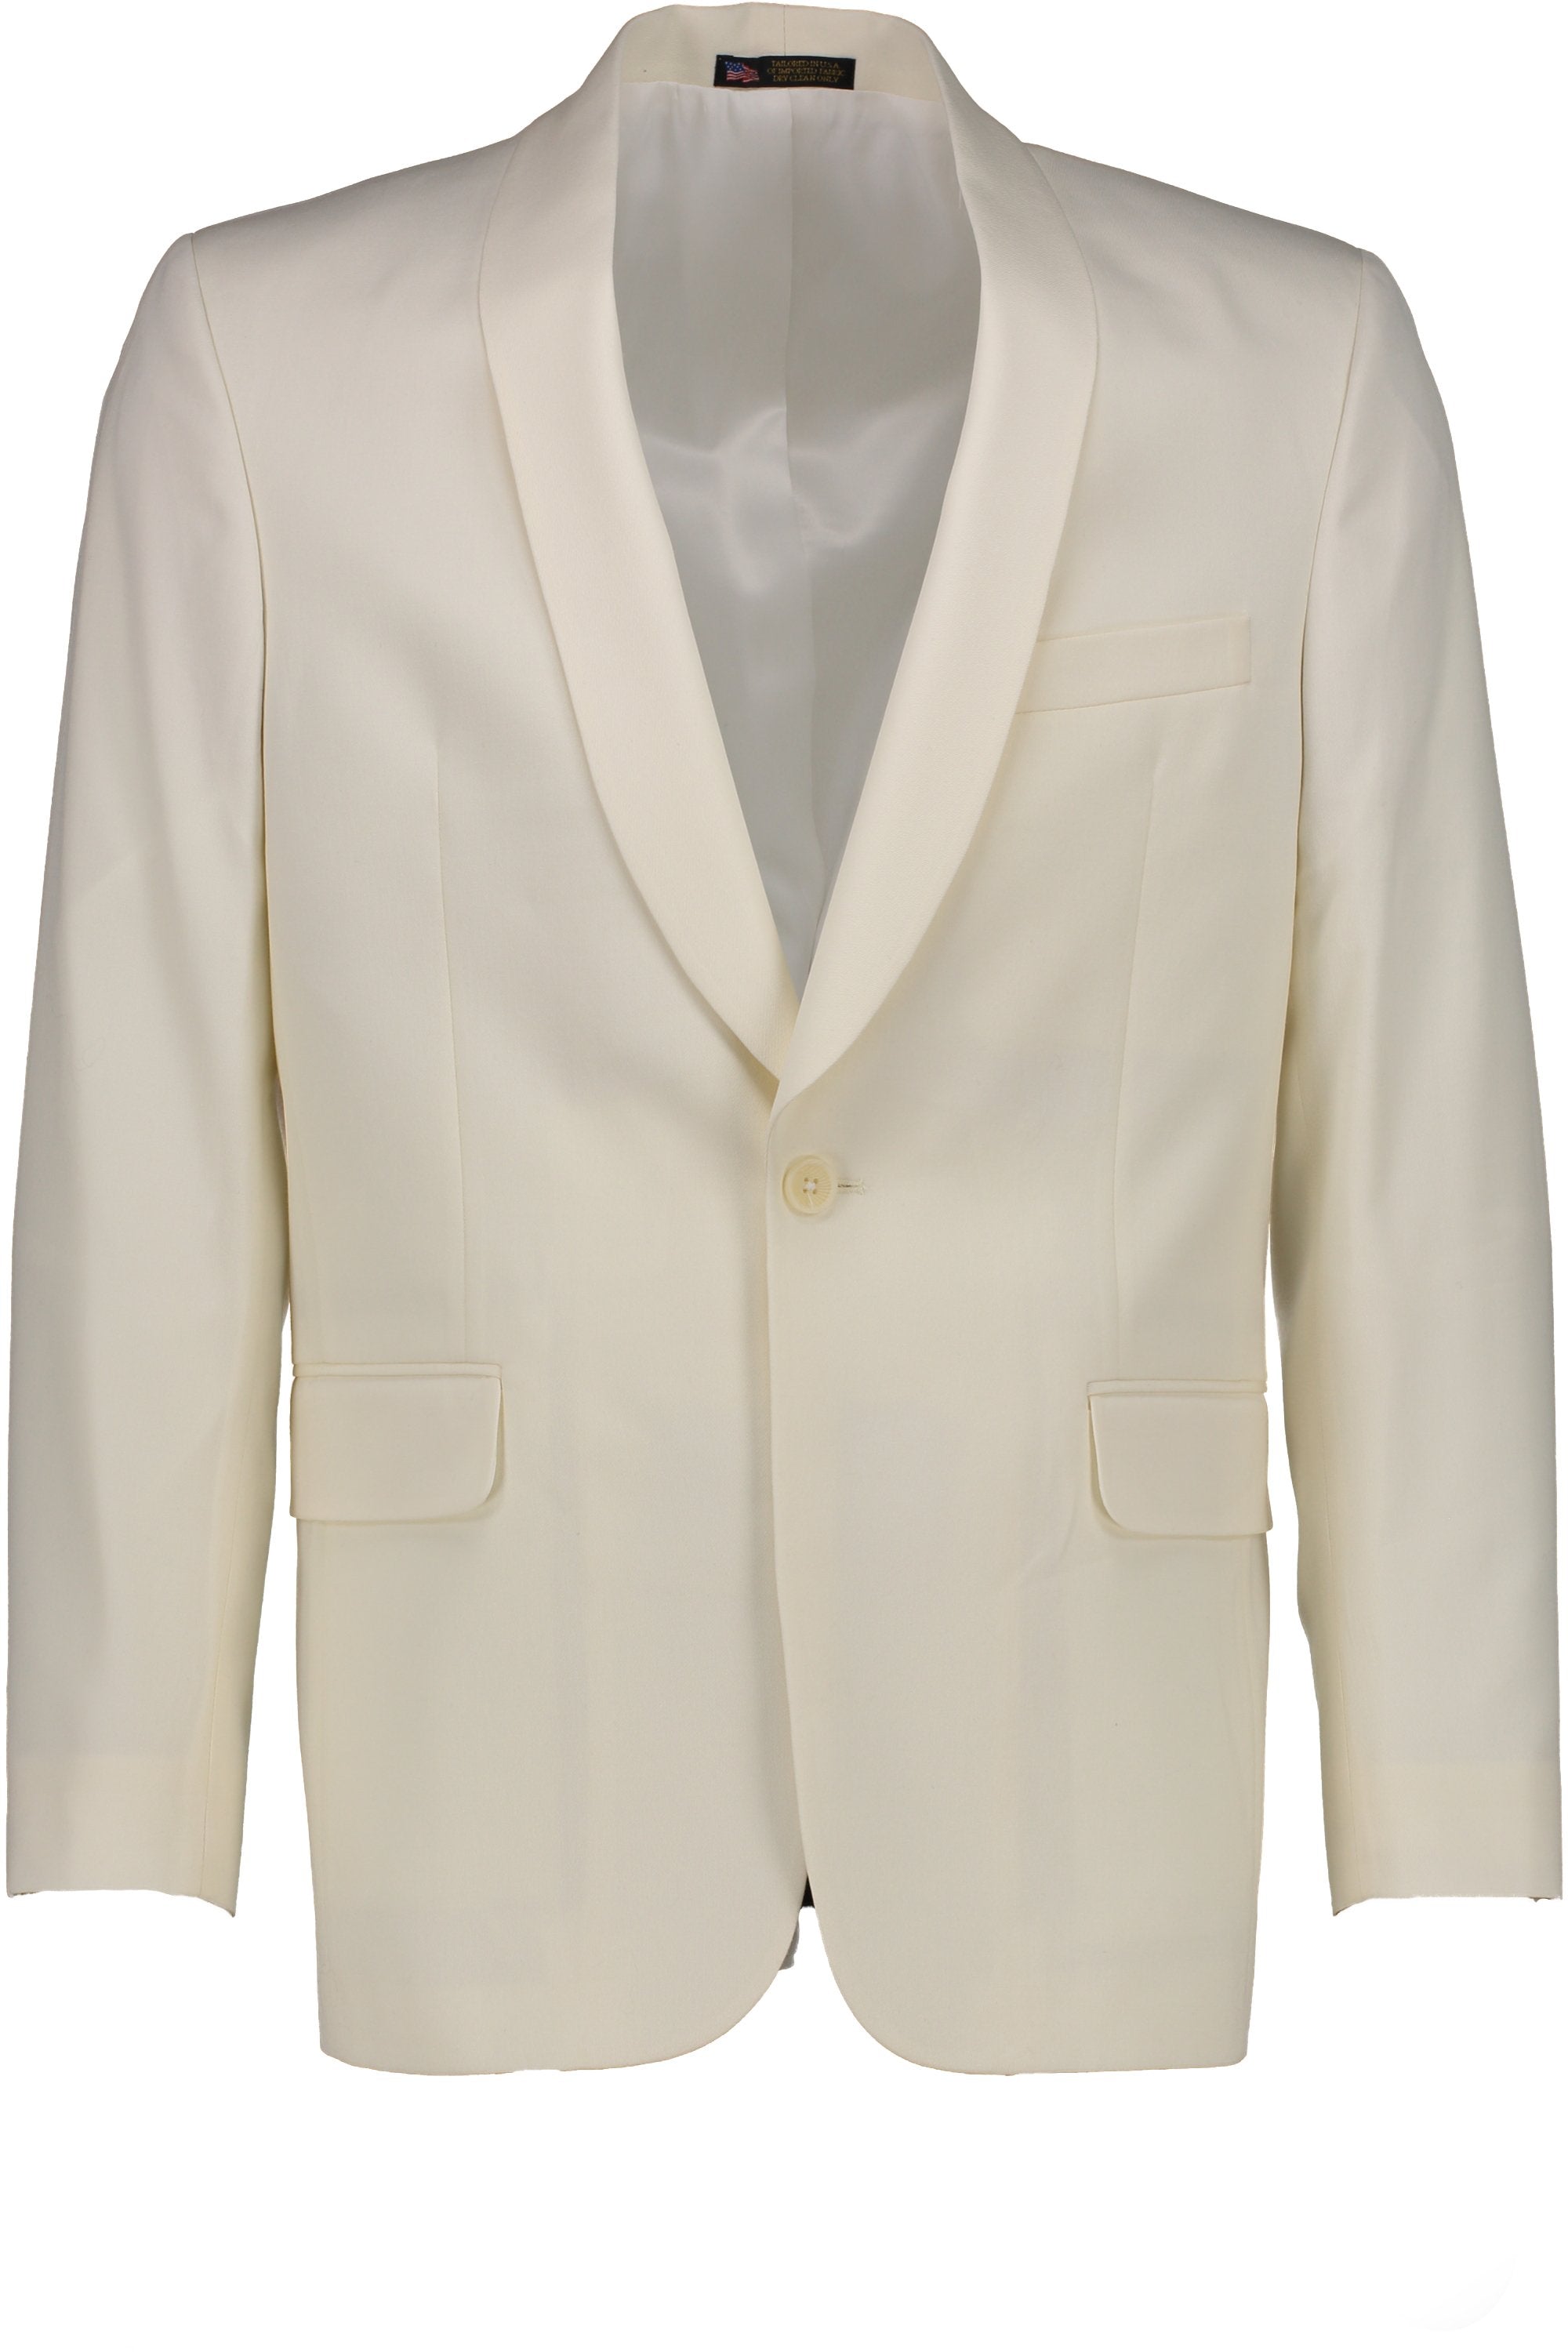 Classic Fit Ivory Wool Dinner Jacket with Cream Satin Shawl Collar